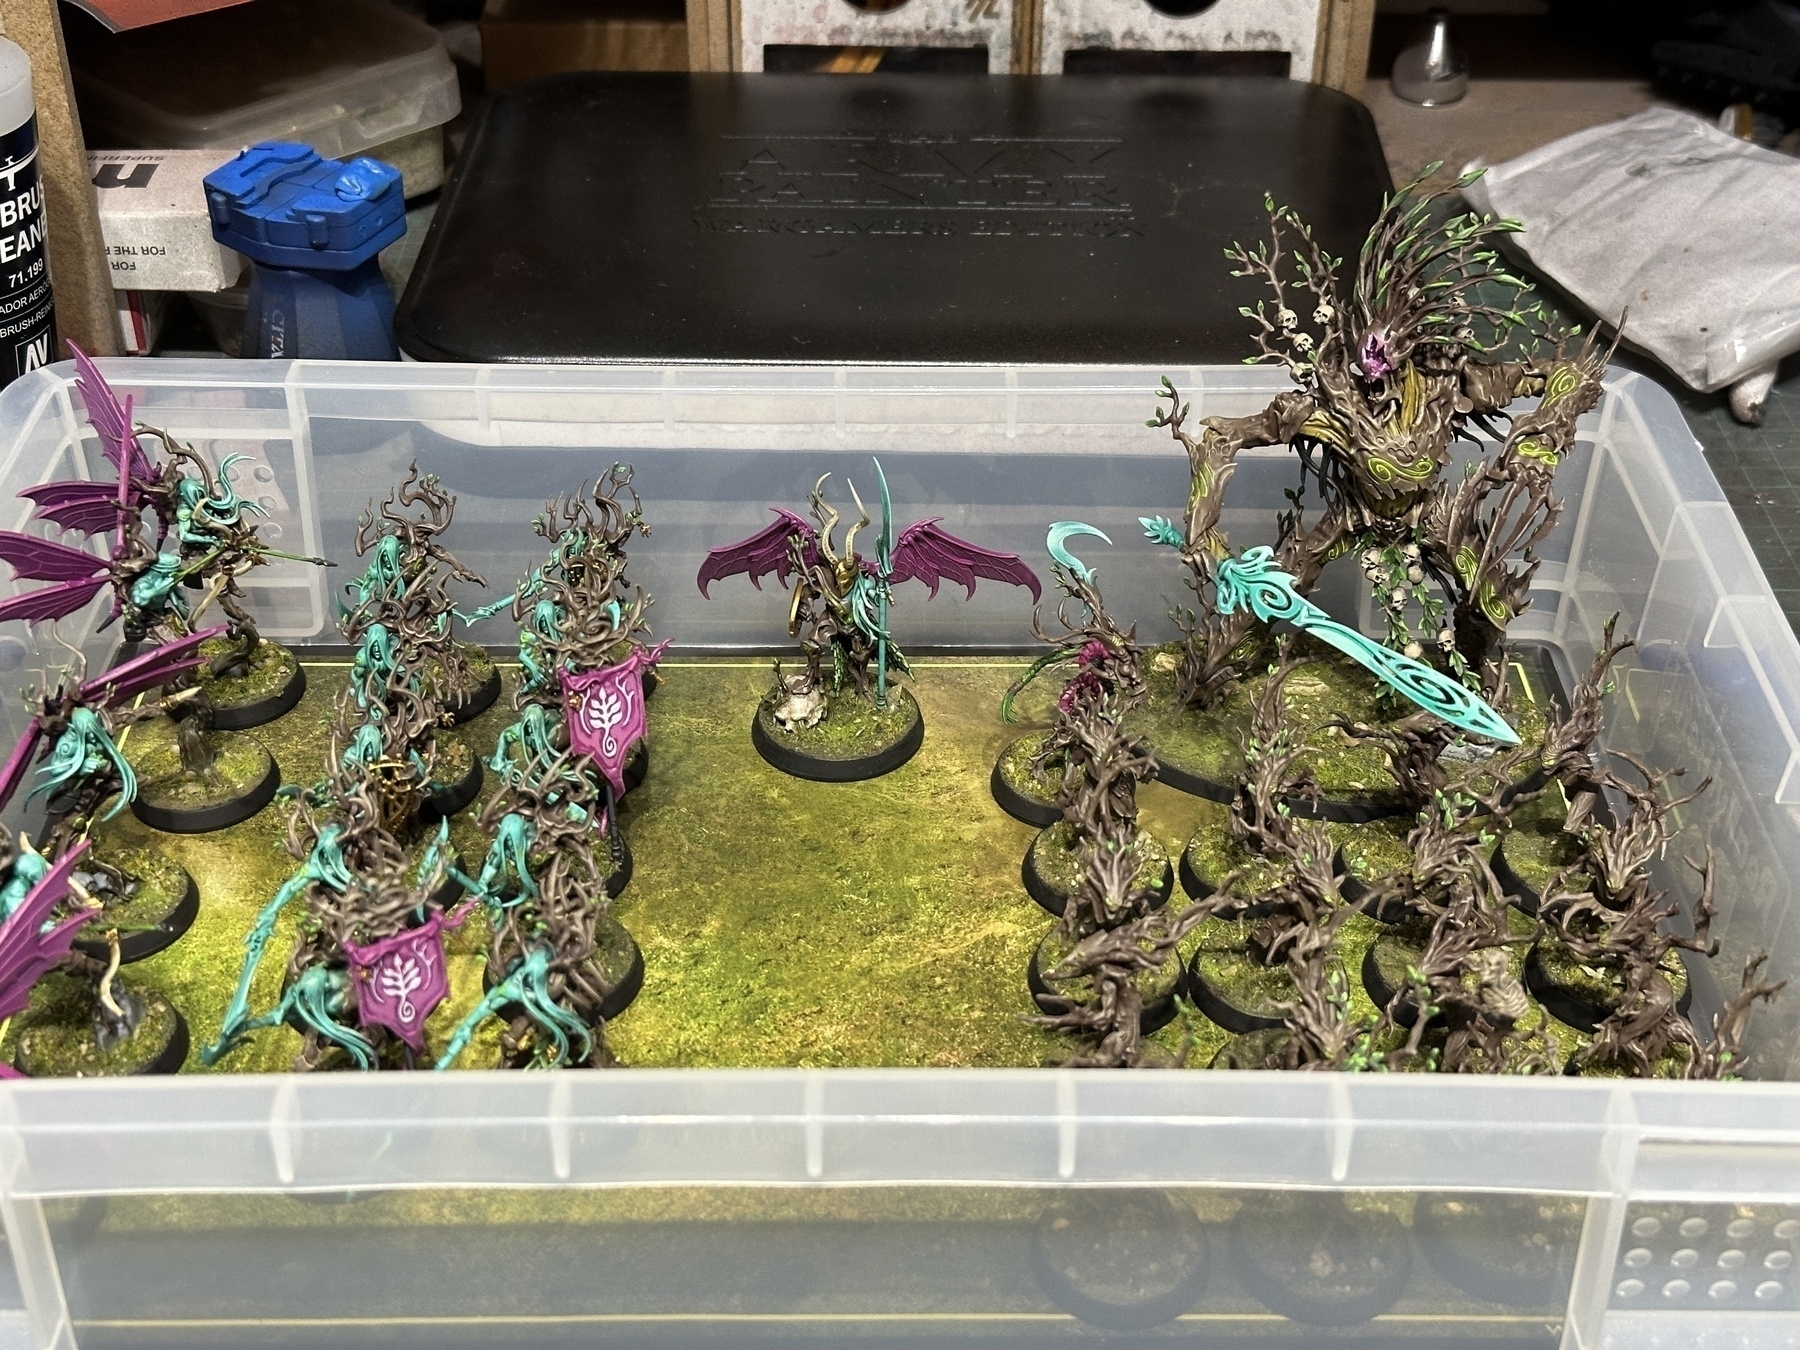 Auto-generated description: A collection of intricately painted miniature fantasy figures, featuring slender, elven-like characters with vibrant teal and purple detailing, stands on a surface mimicking a mossy ground,, is neatly organized in a plastic storage container on what appears to be a workbench cluttered with tools and other items.